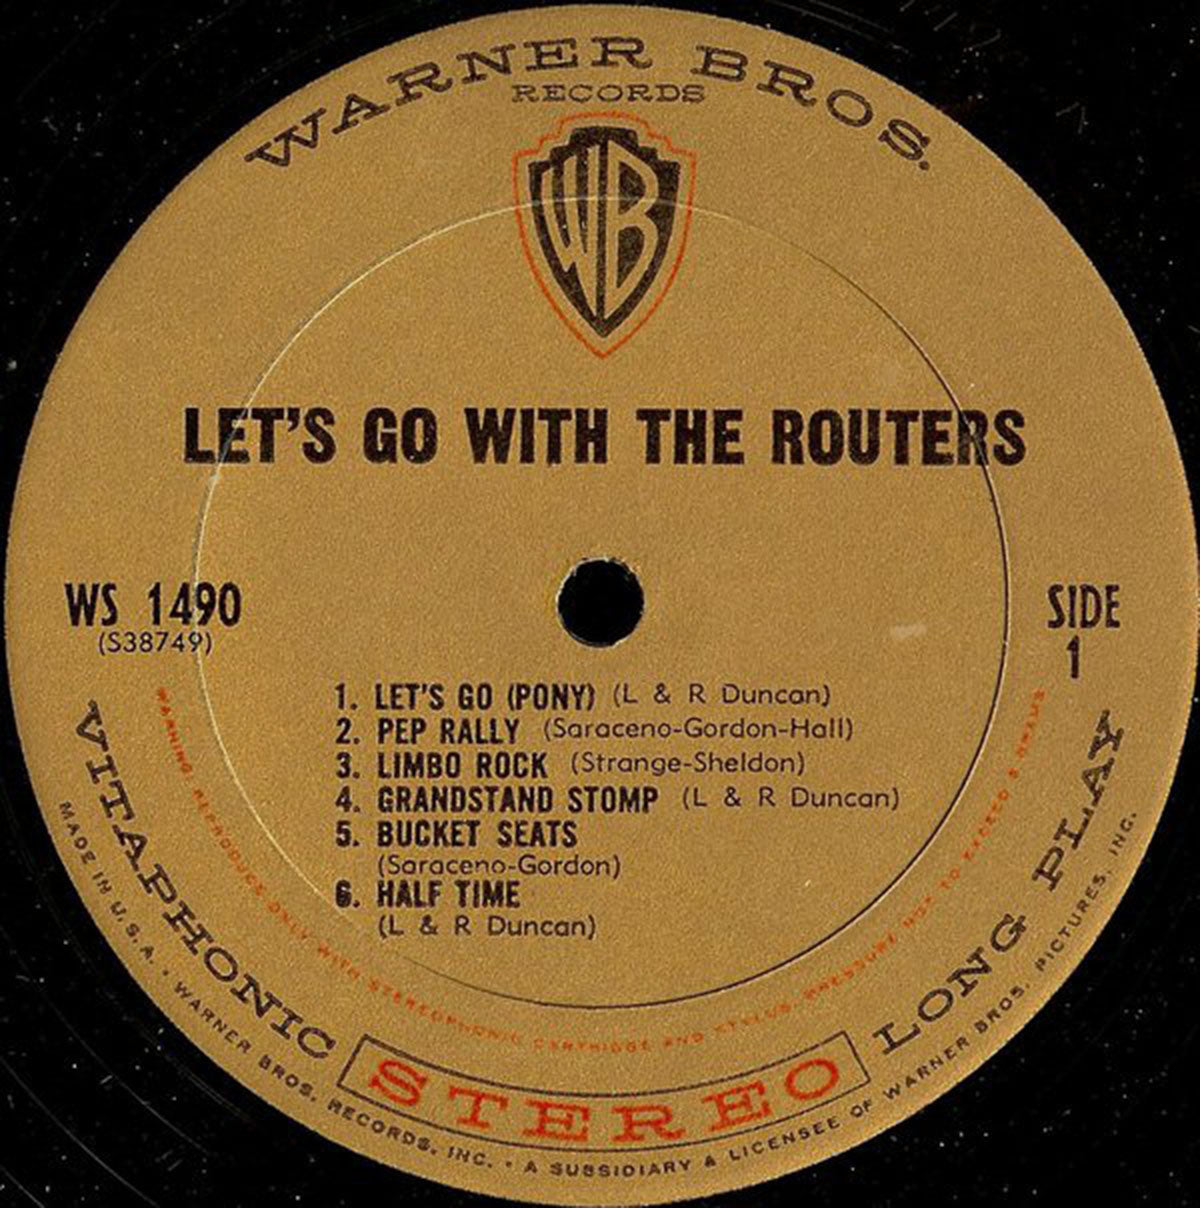 The Routers – Let's Go! With The Routers - US Pressing